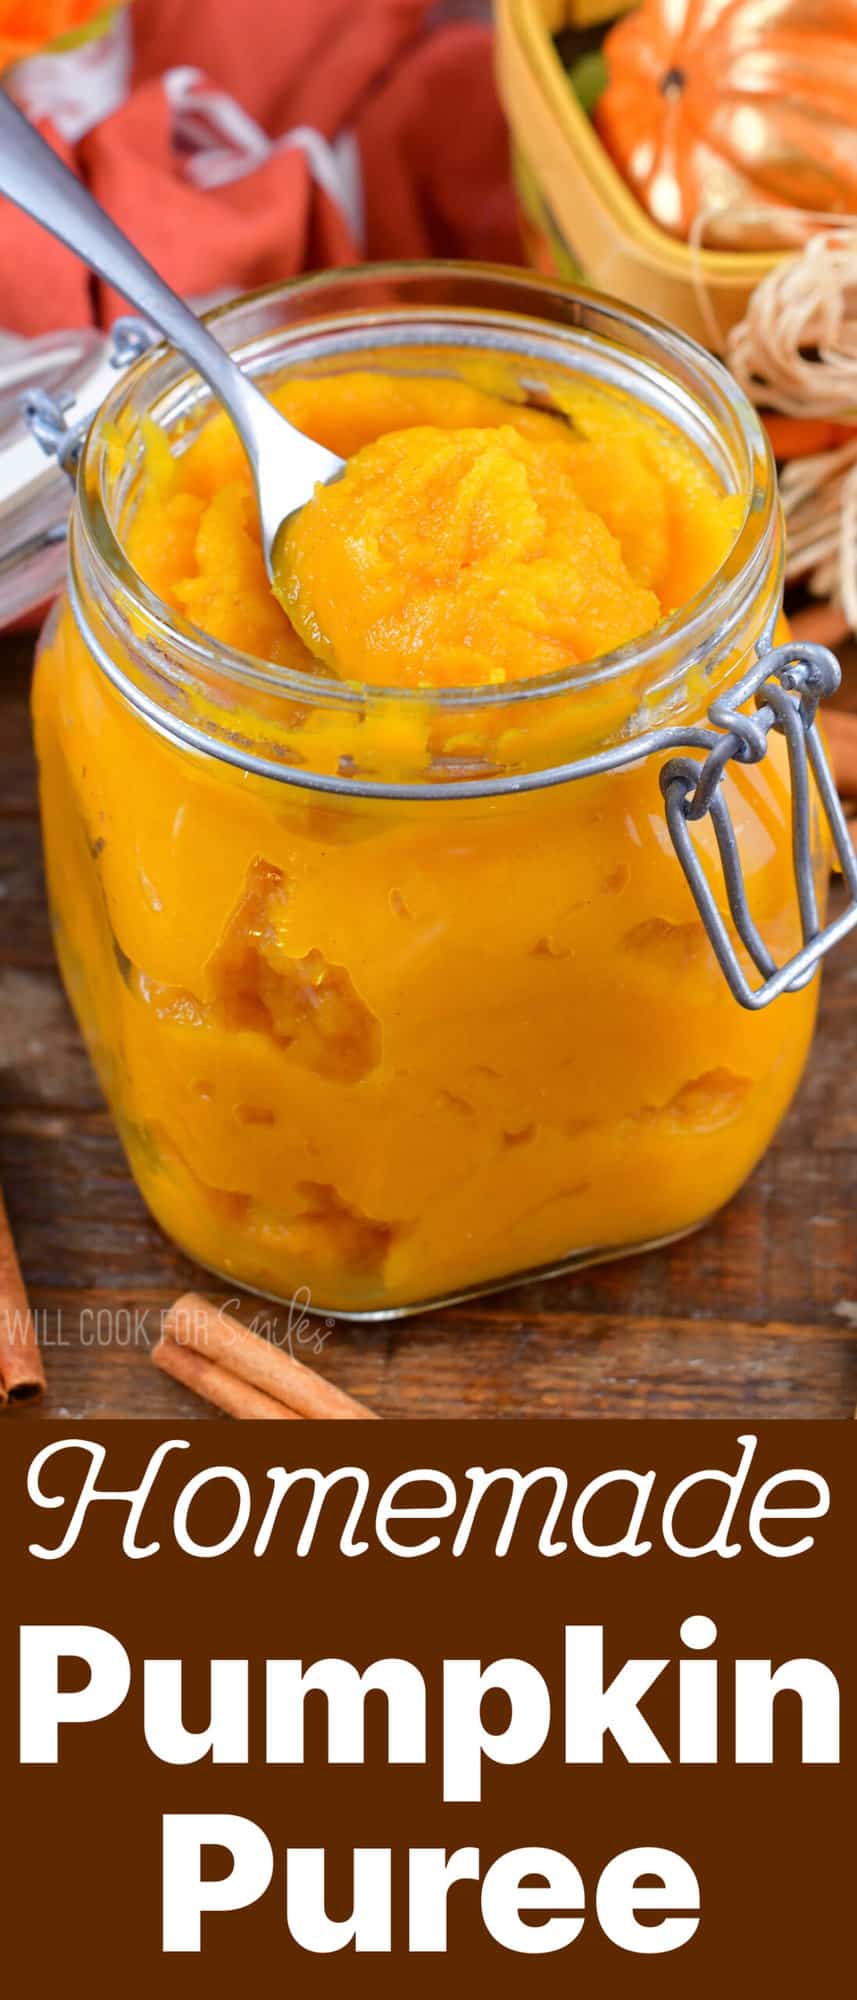 pumpkin puree in a glass jar with a spoon and title below.